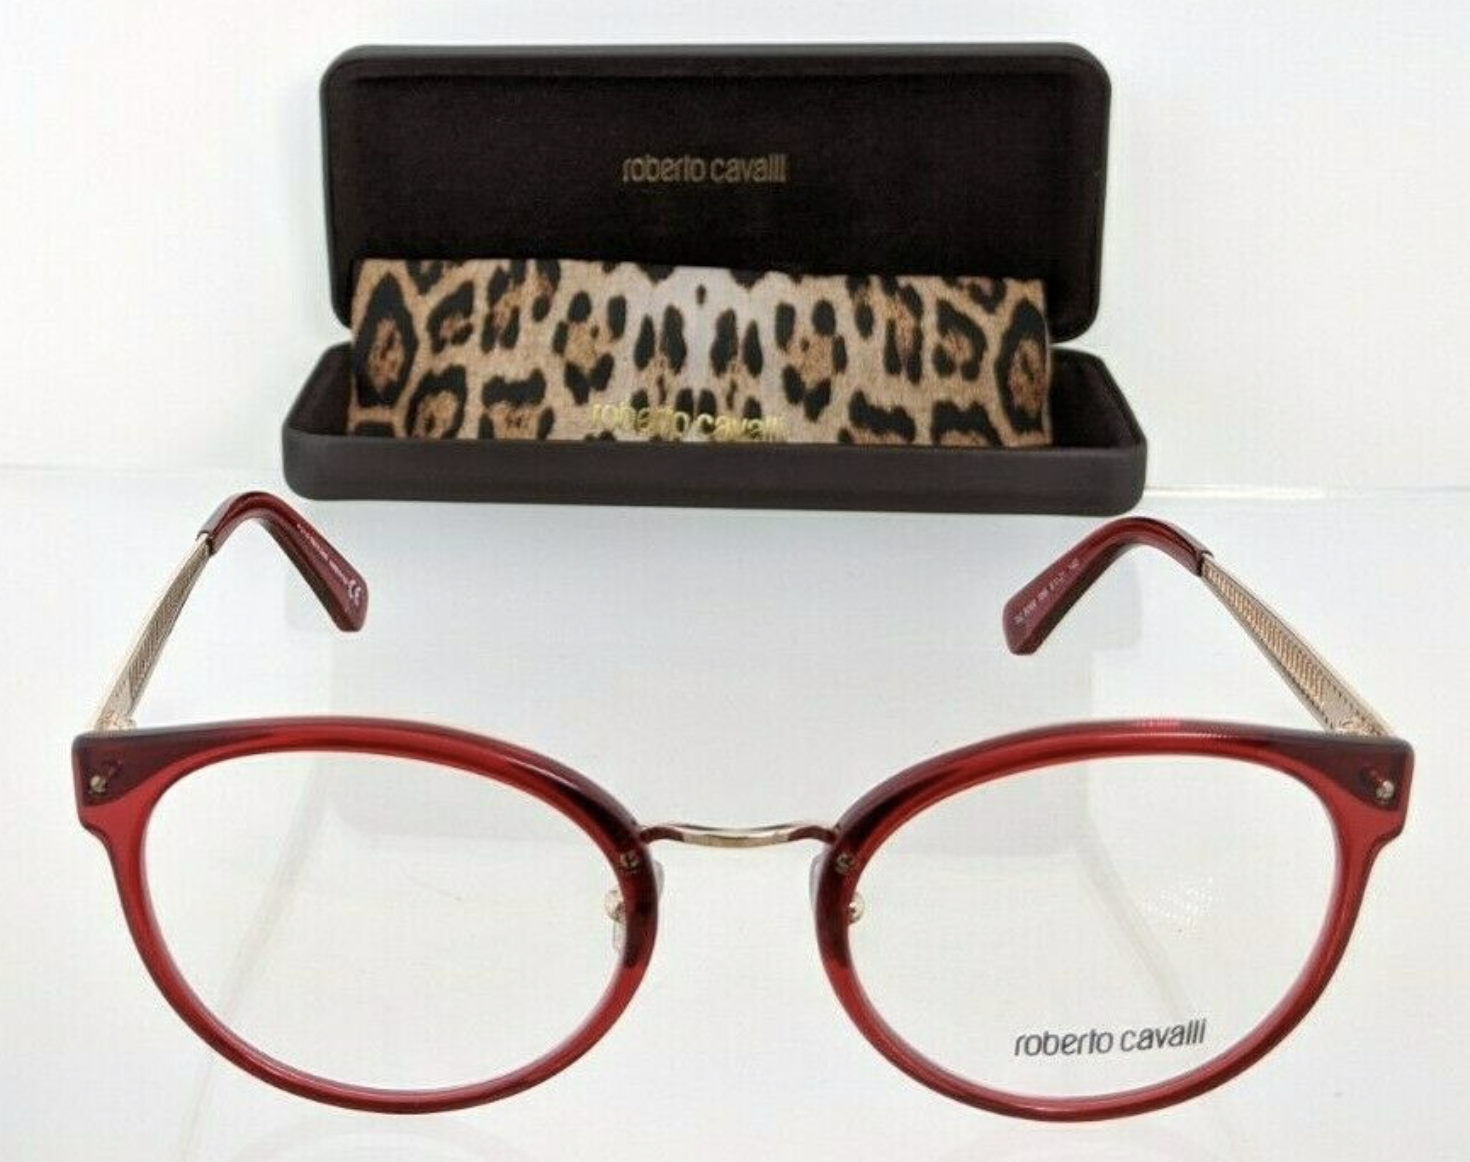 Brand New Authentic Roberto Cavalli Eyeglasses RC 5099 066 51mm Red & Gold Frame